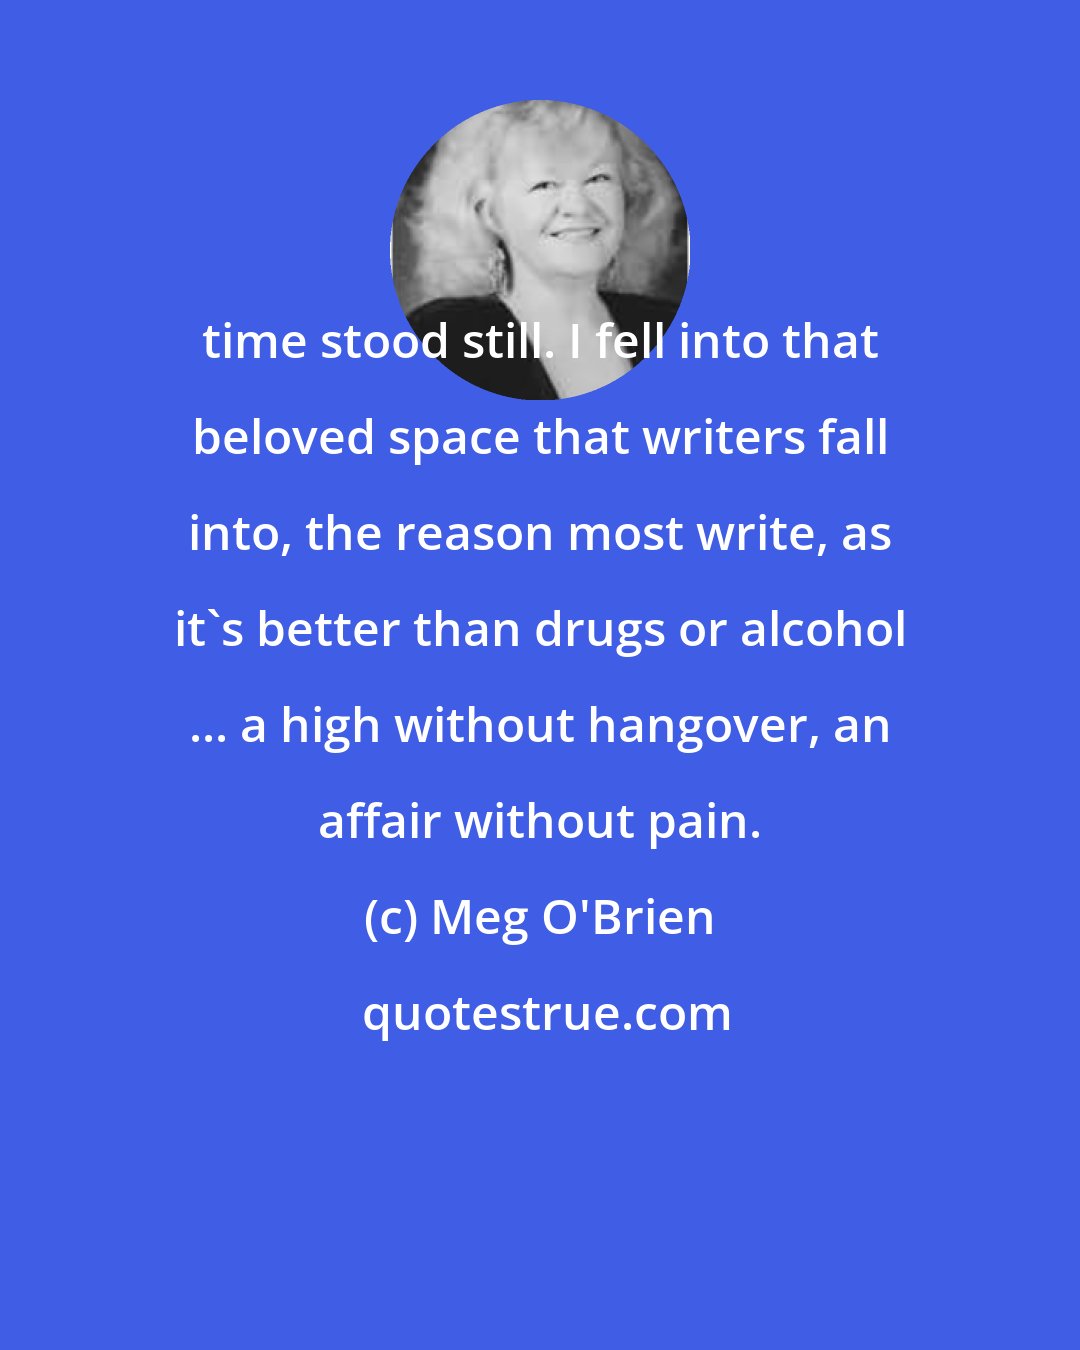 Meg O'Brien: time stood still. I fell into that beloved space that writers fall into, the reason most write, as it's better than drugs or alcohol ... a high without hangover, an affair without pain.